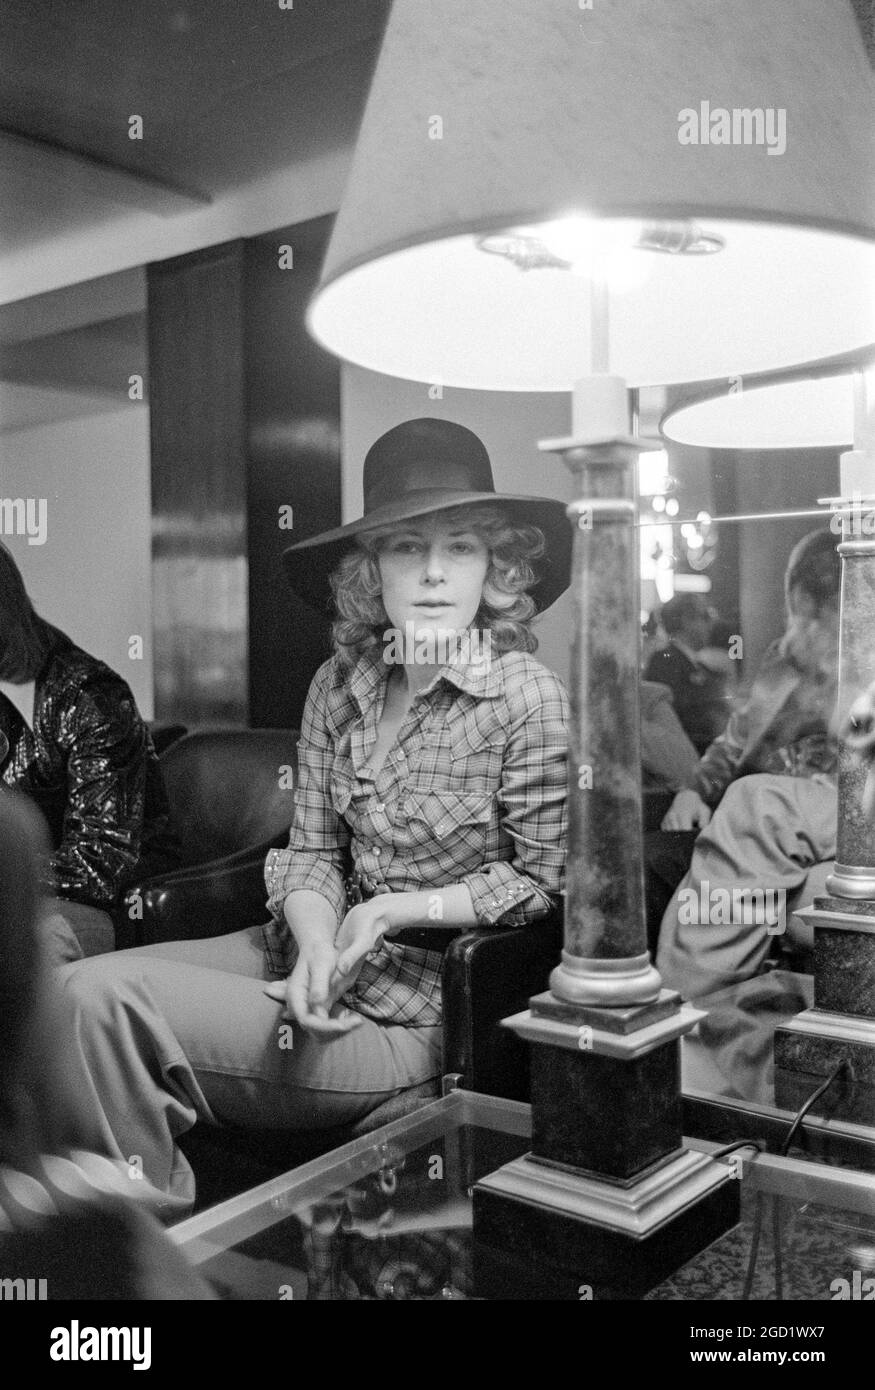 Swedish pop group ABBA at their hotel in London after winning the Euvovision Song Contest in Brighton, England, in April, 1974. Annifrid Lyngstad.Photo: Lennart Edling / Kamerabild / TT News Agency / Code: 3012 Stock Photo